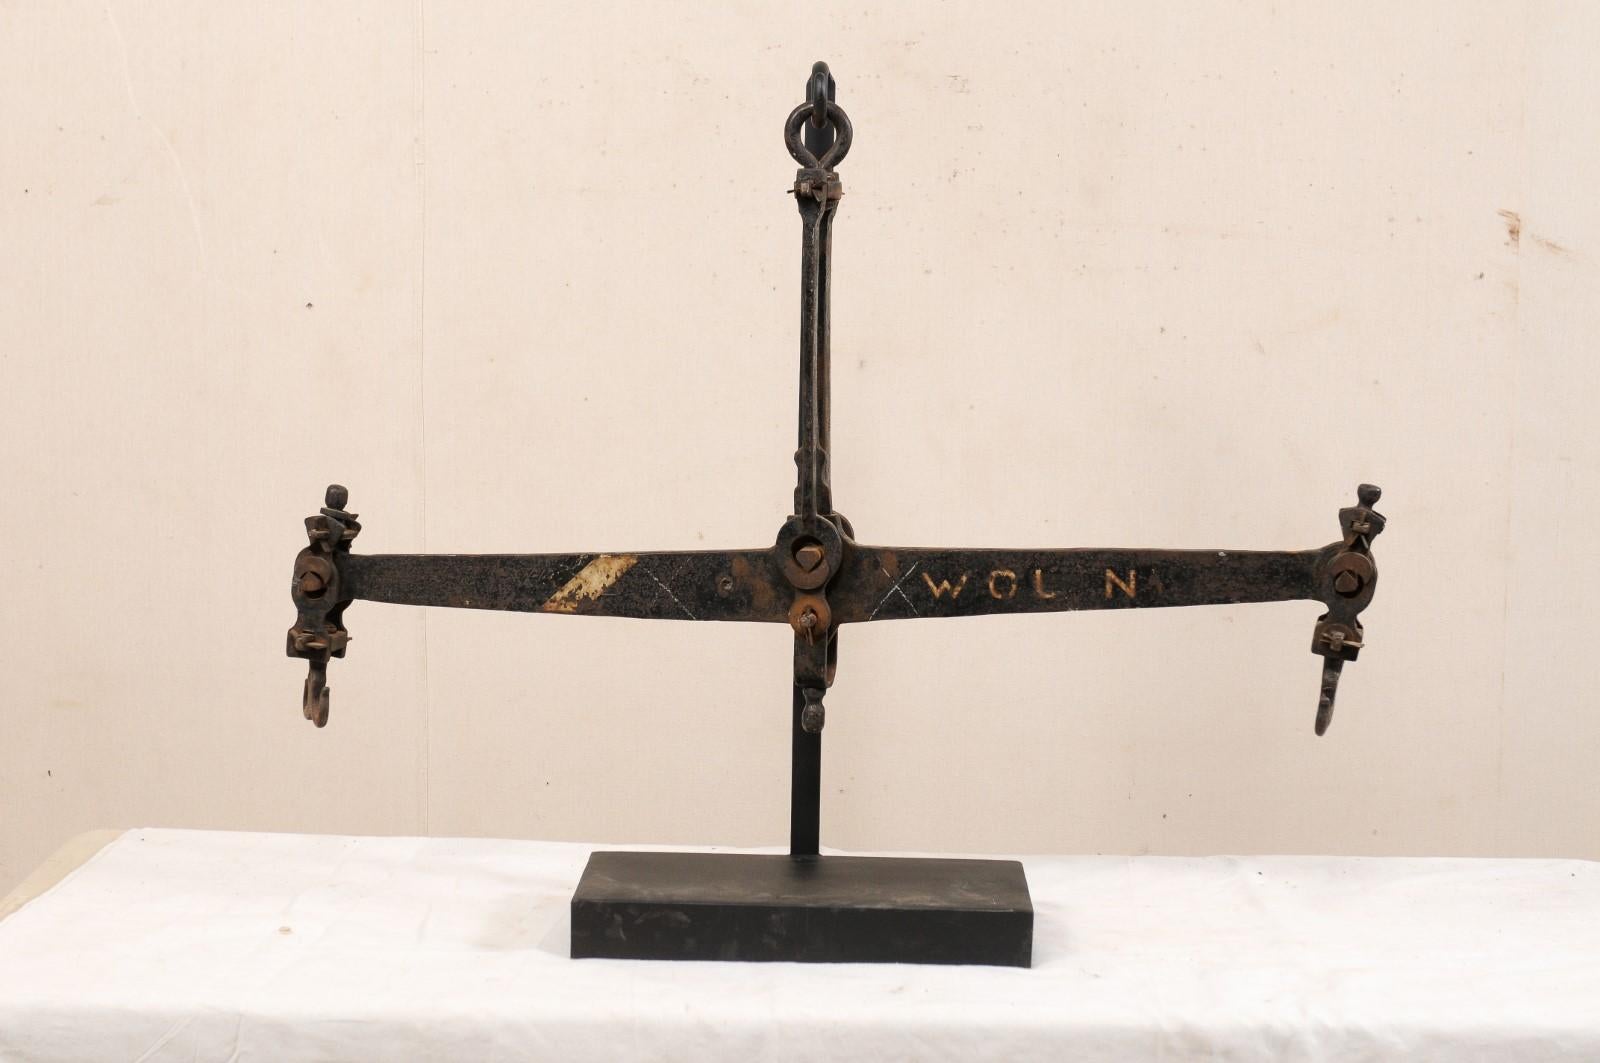 A French iron scale from the mid-20th century presented on custom iron stand. This vintage scale from France is a sizable piece, being over 3.5 feet in length, and features an elongated central bar, with double-hooked ends, and connecting to top at